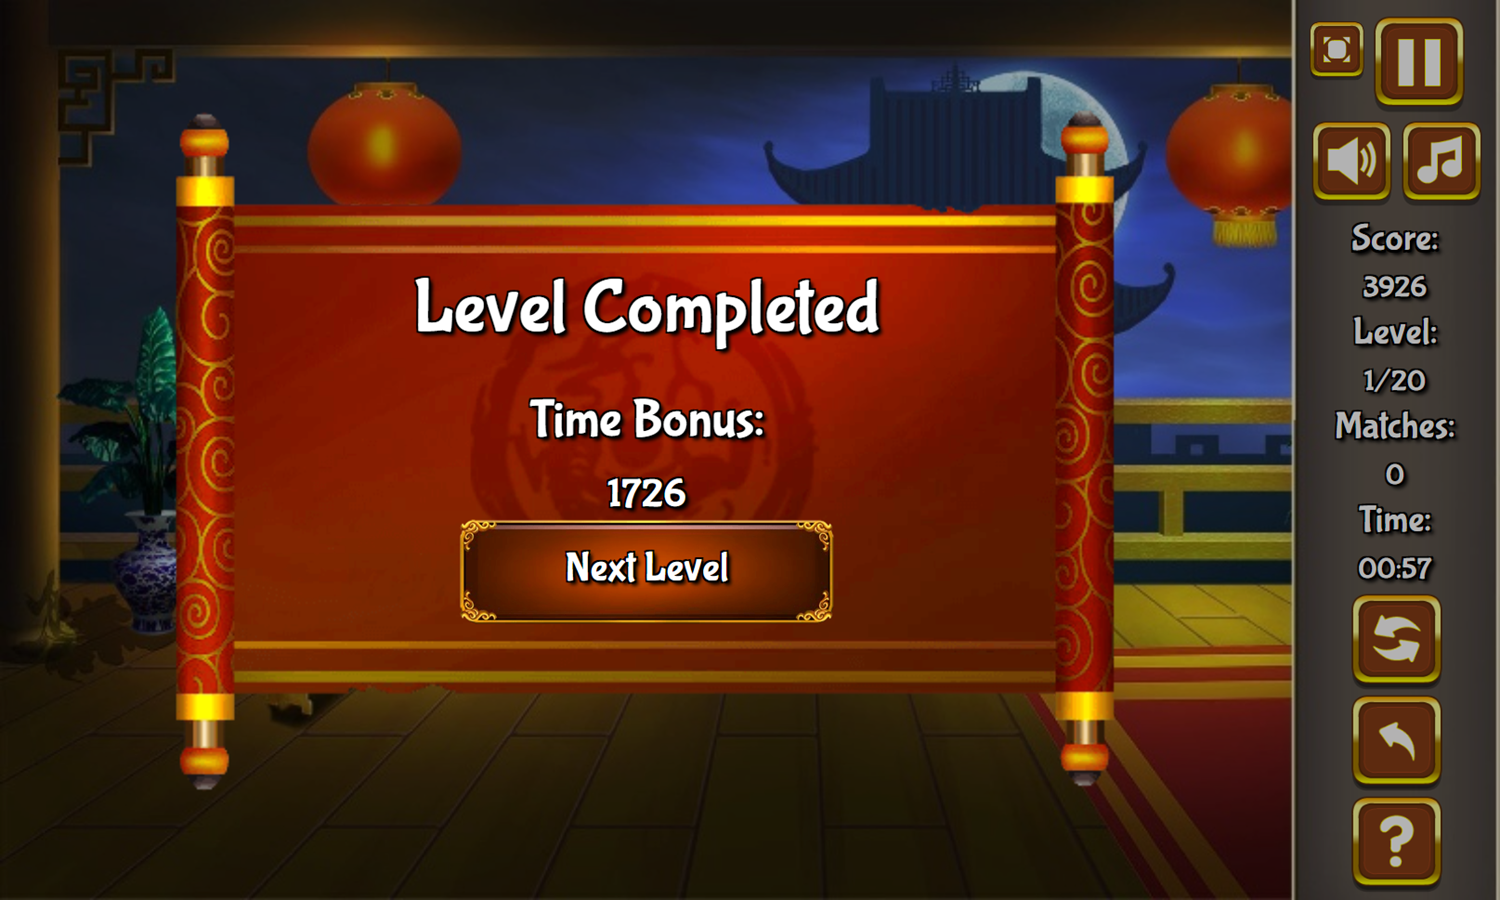 China Temple Mahjong Game Level Completed Screenshot.